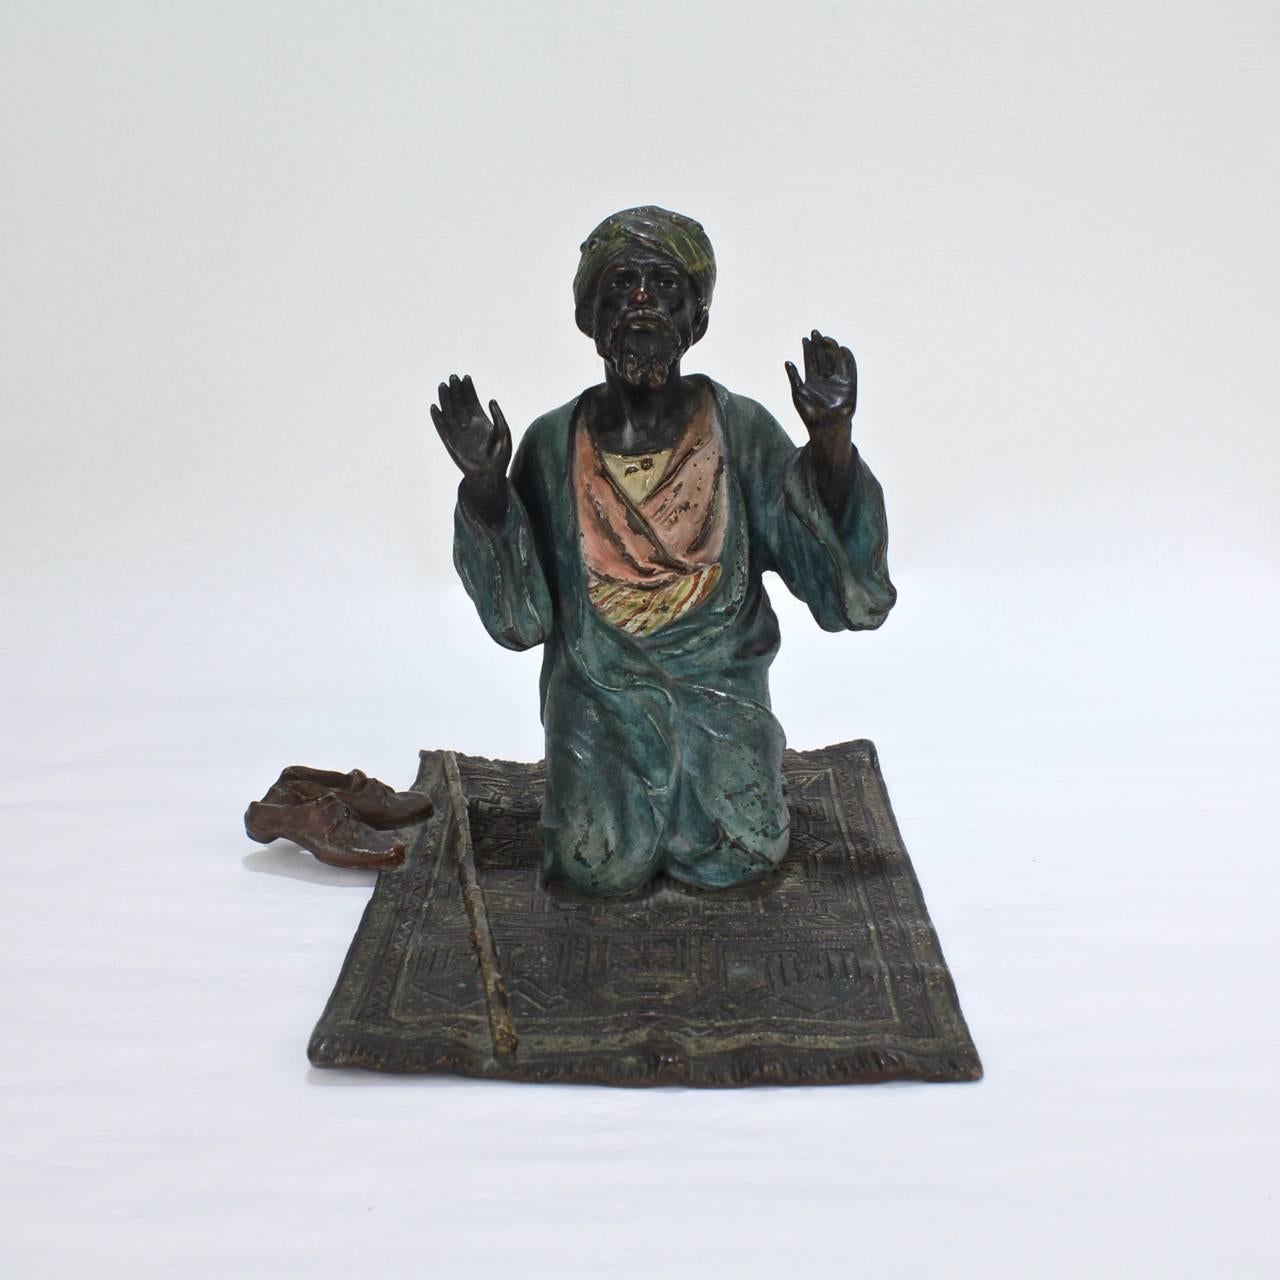 A fine, antique cold-painted orientalist bronze by Franz Bergmann from the Bergmann factory and from the original, early production period.

Depicting an Arab man in prayer on a rug with shoes and walking stick.

Underside marked GESCHUTZT and with